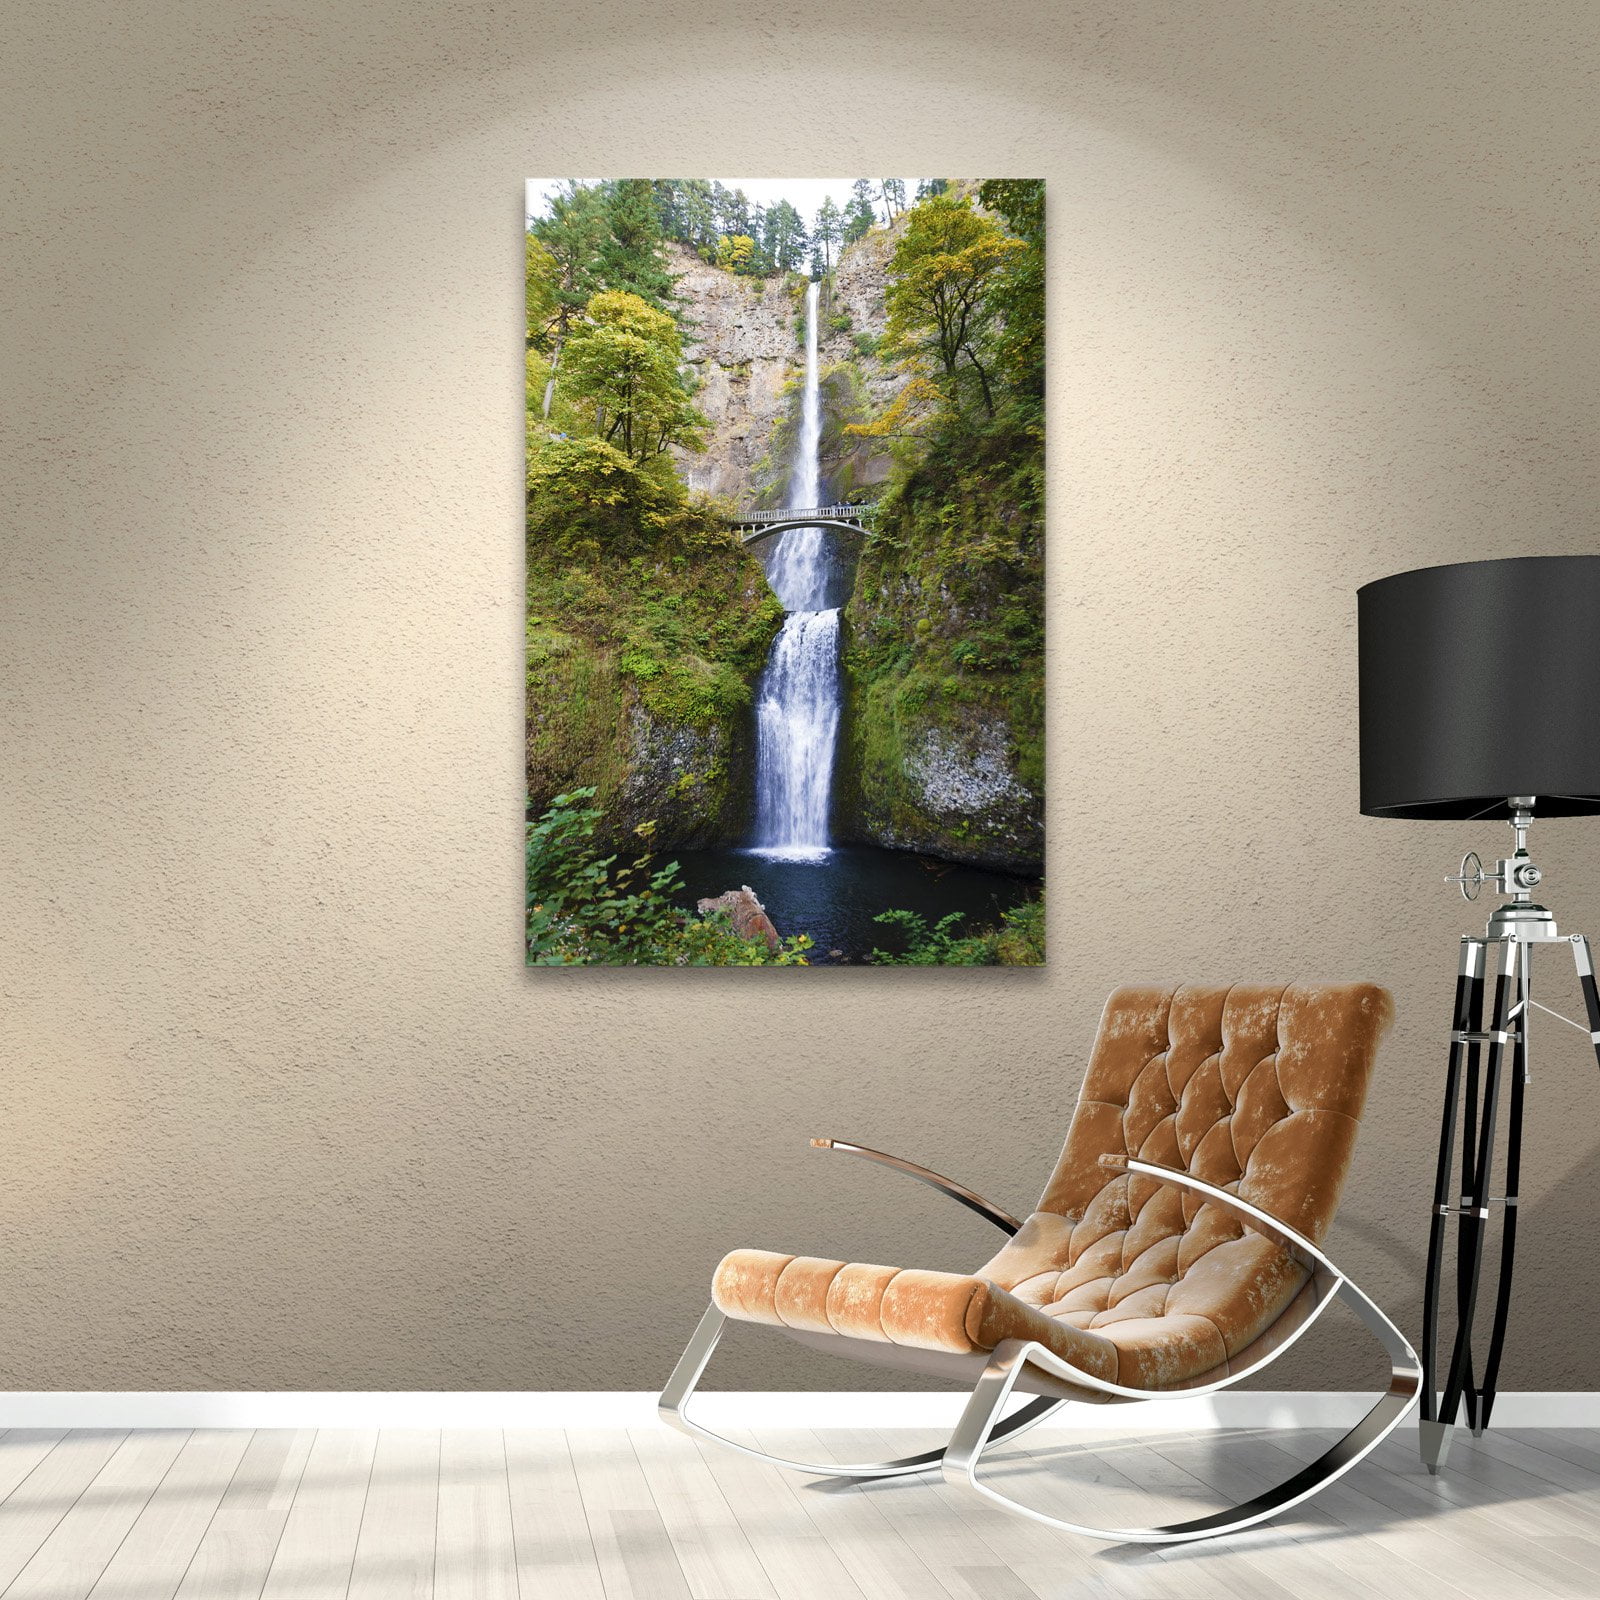 Holds 22.5 by 34.5-Inch Image ArtWall Cody York Multnomah Falls Floater Framed Gallery-Wrapped Canvas Artwork 24 by 36-Inch